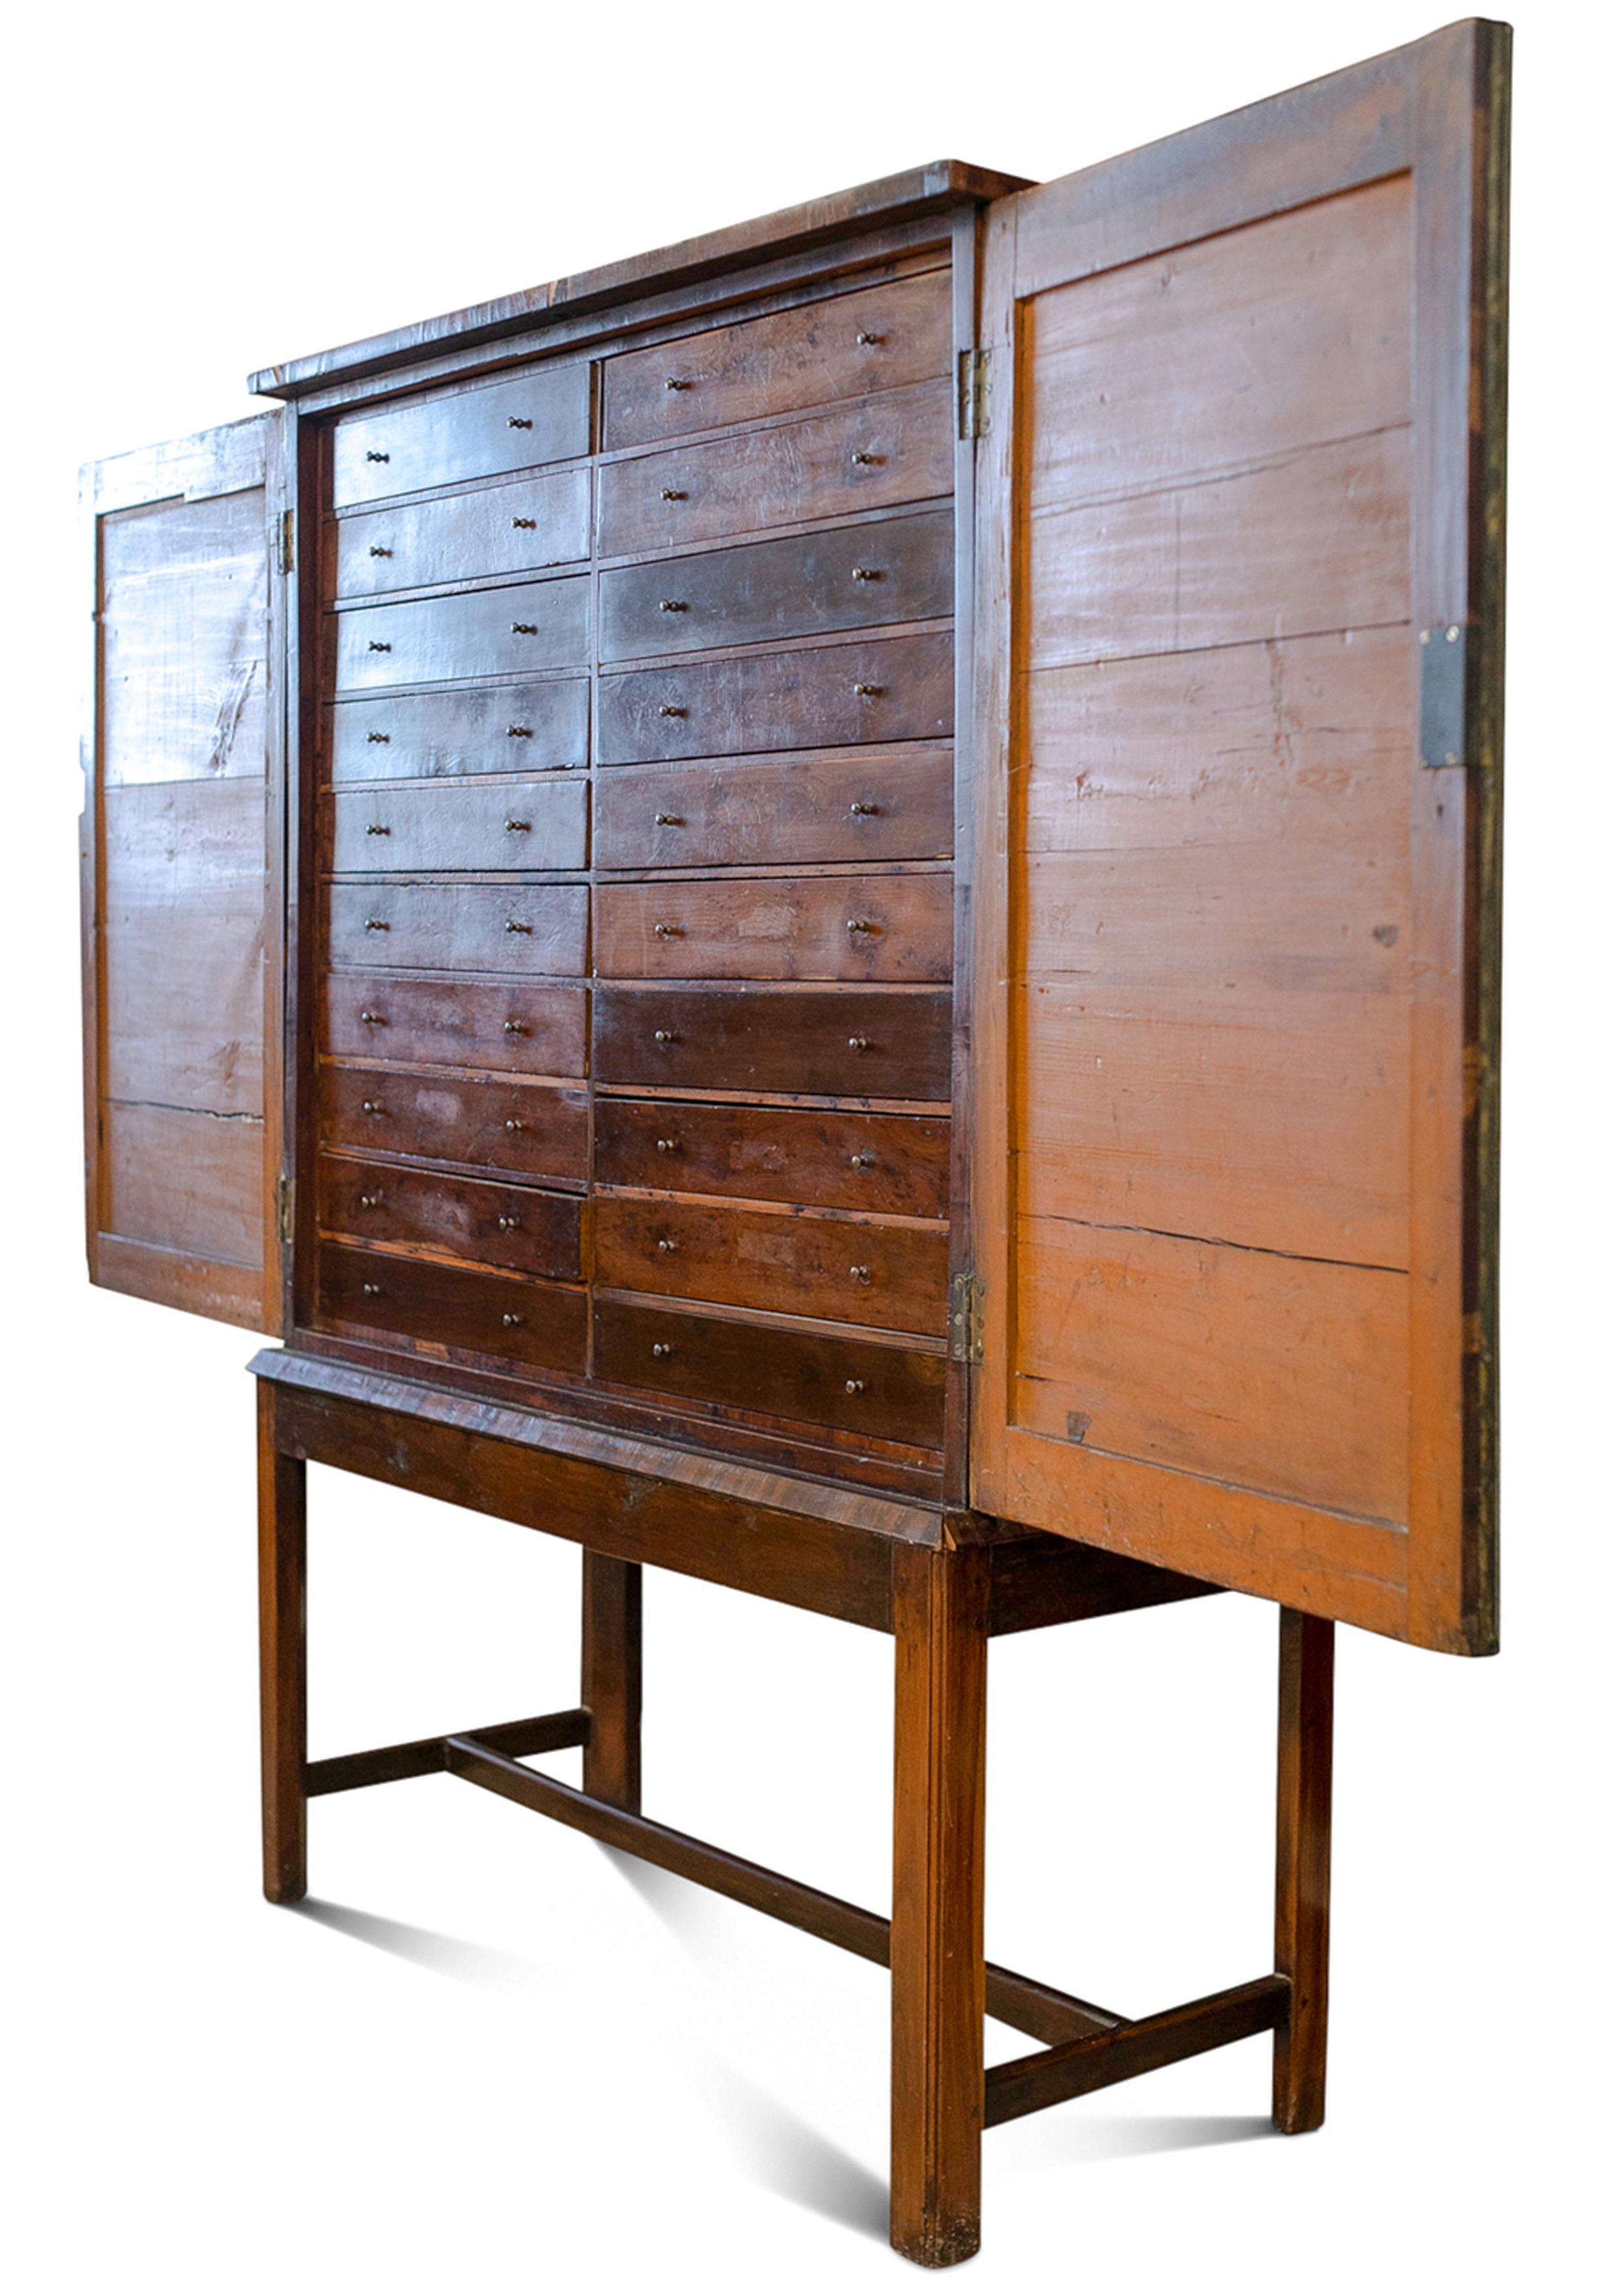 British Rare 18th Century Library Yew Wood Specimen Collectors Cabinet Chest on Stand For Sale